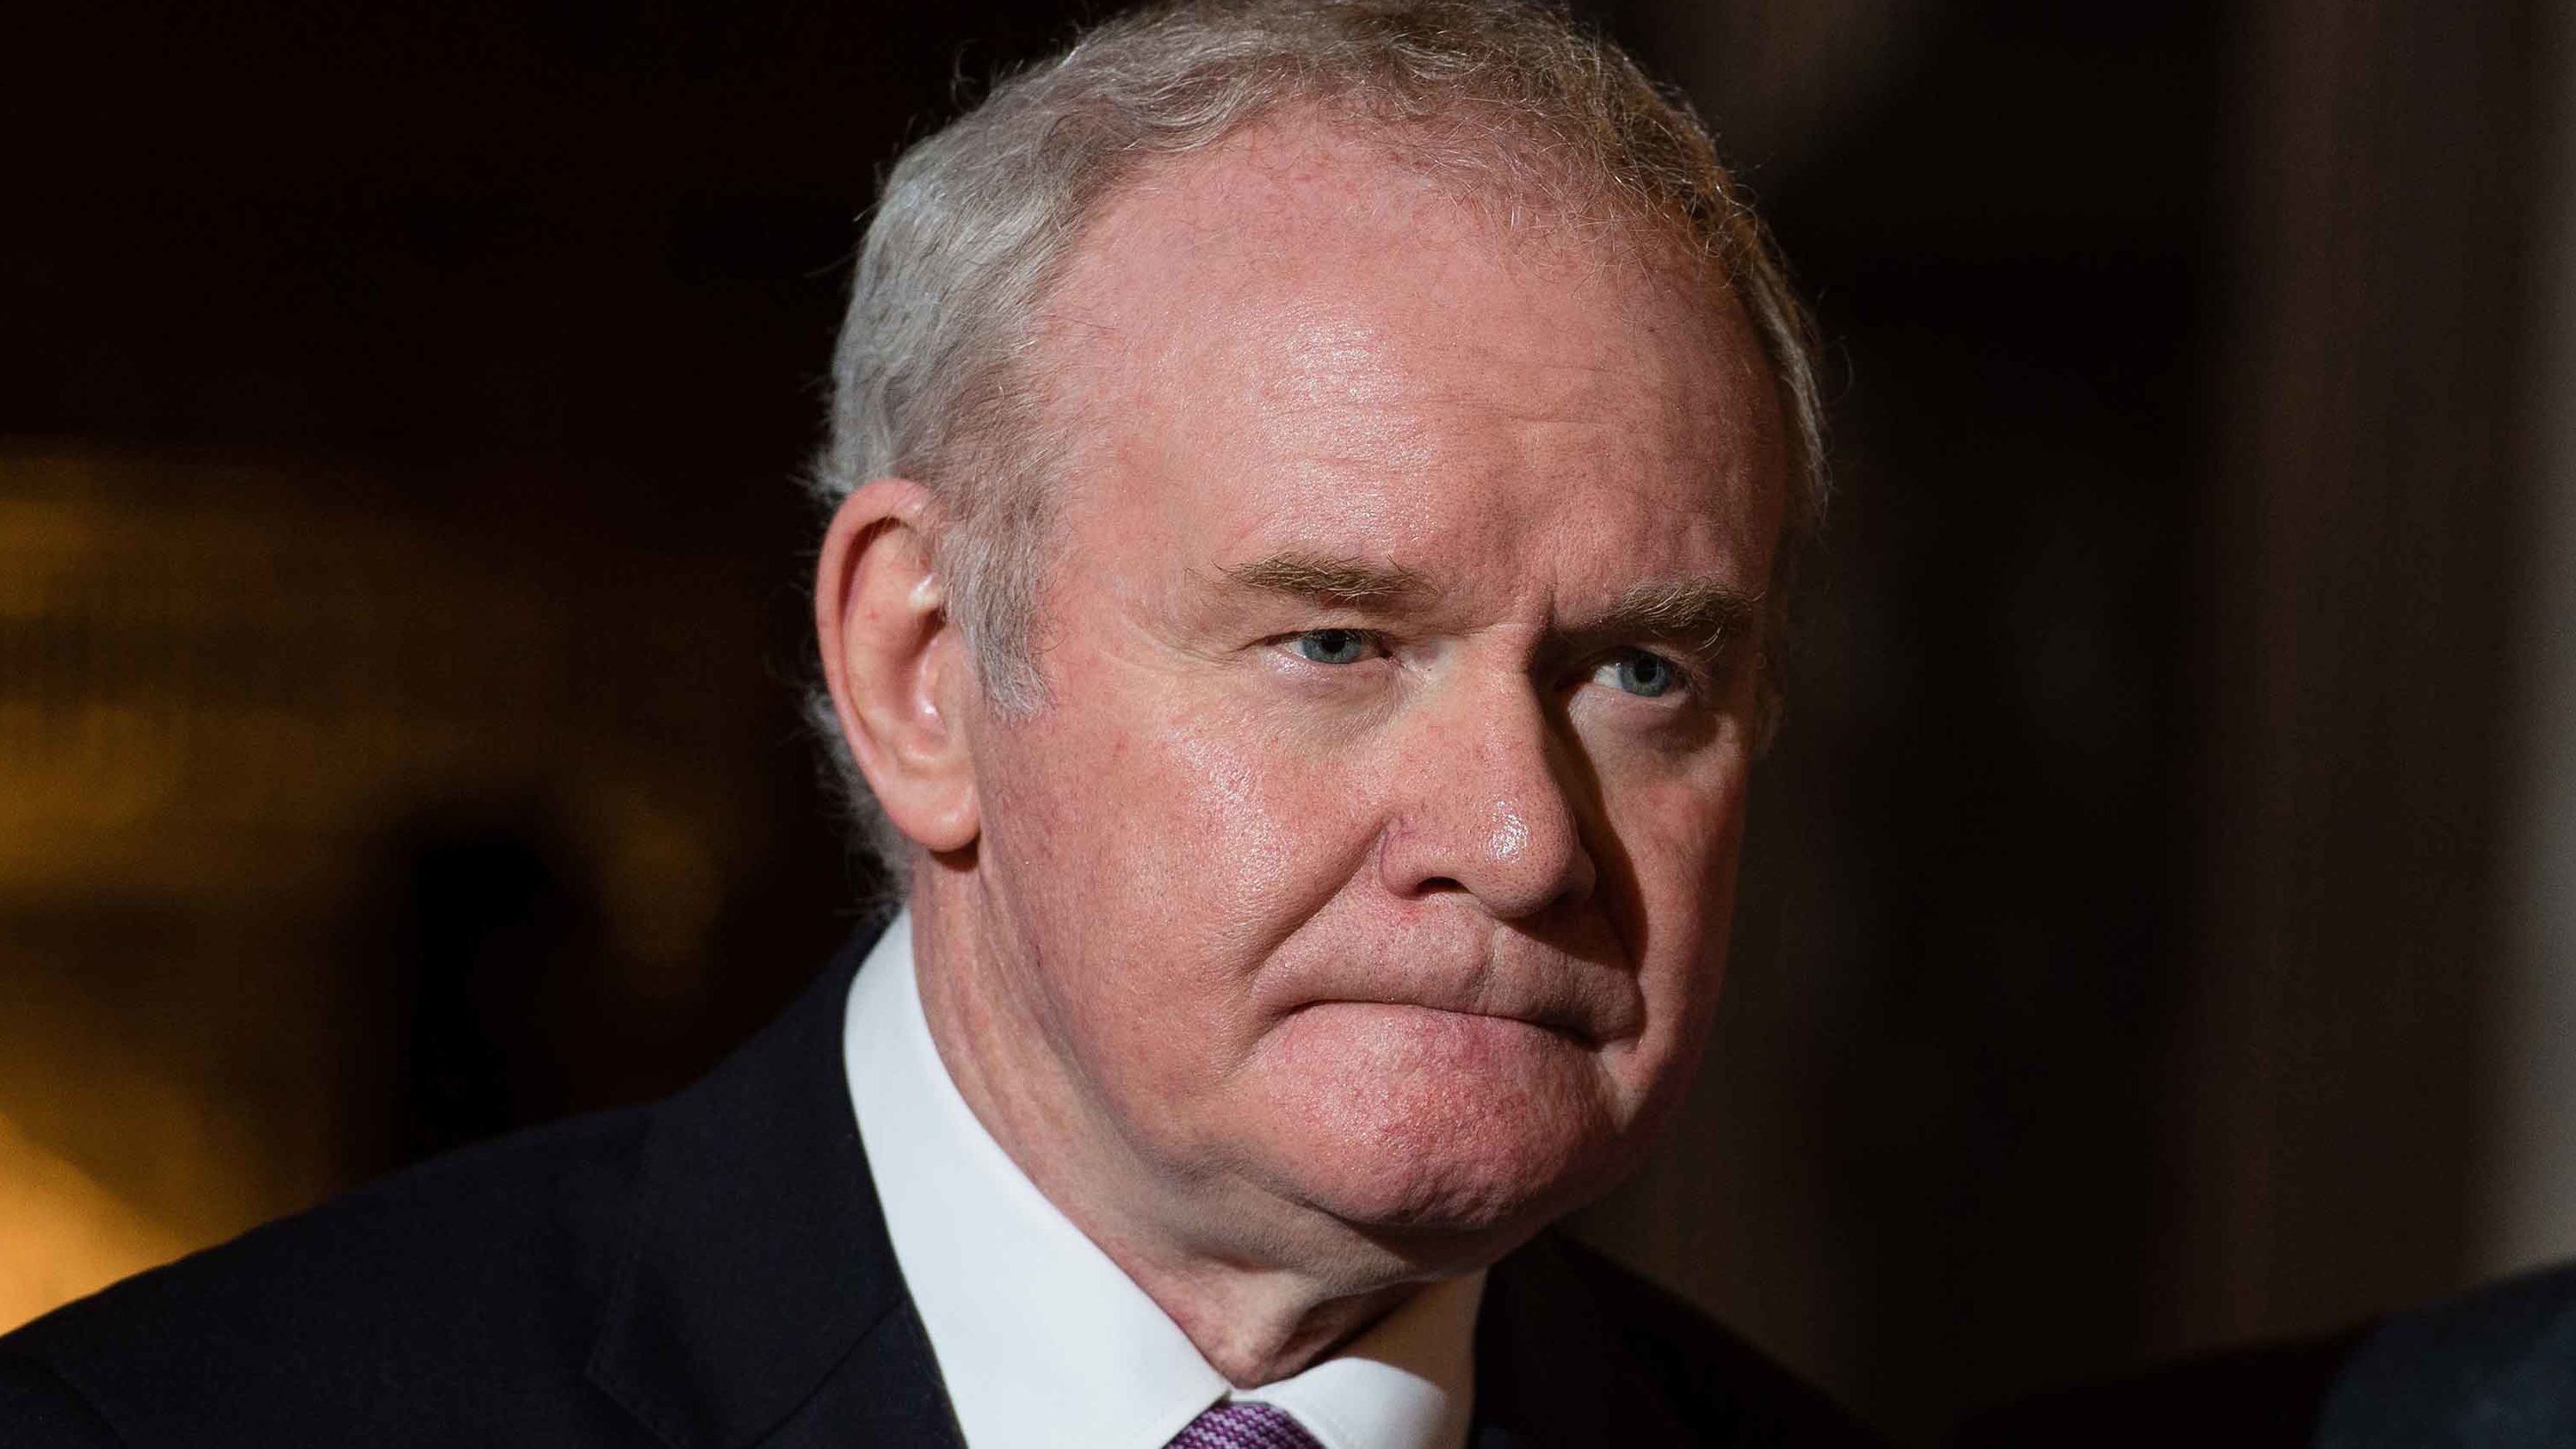 McGuinness resigned from his position in January 2017.